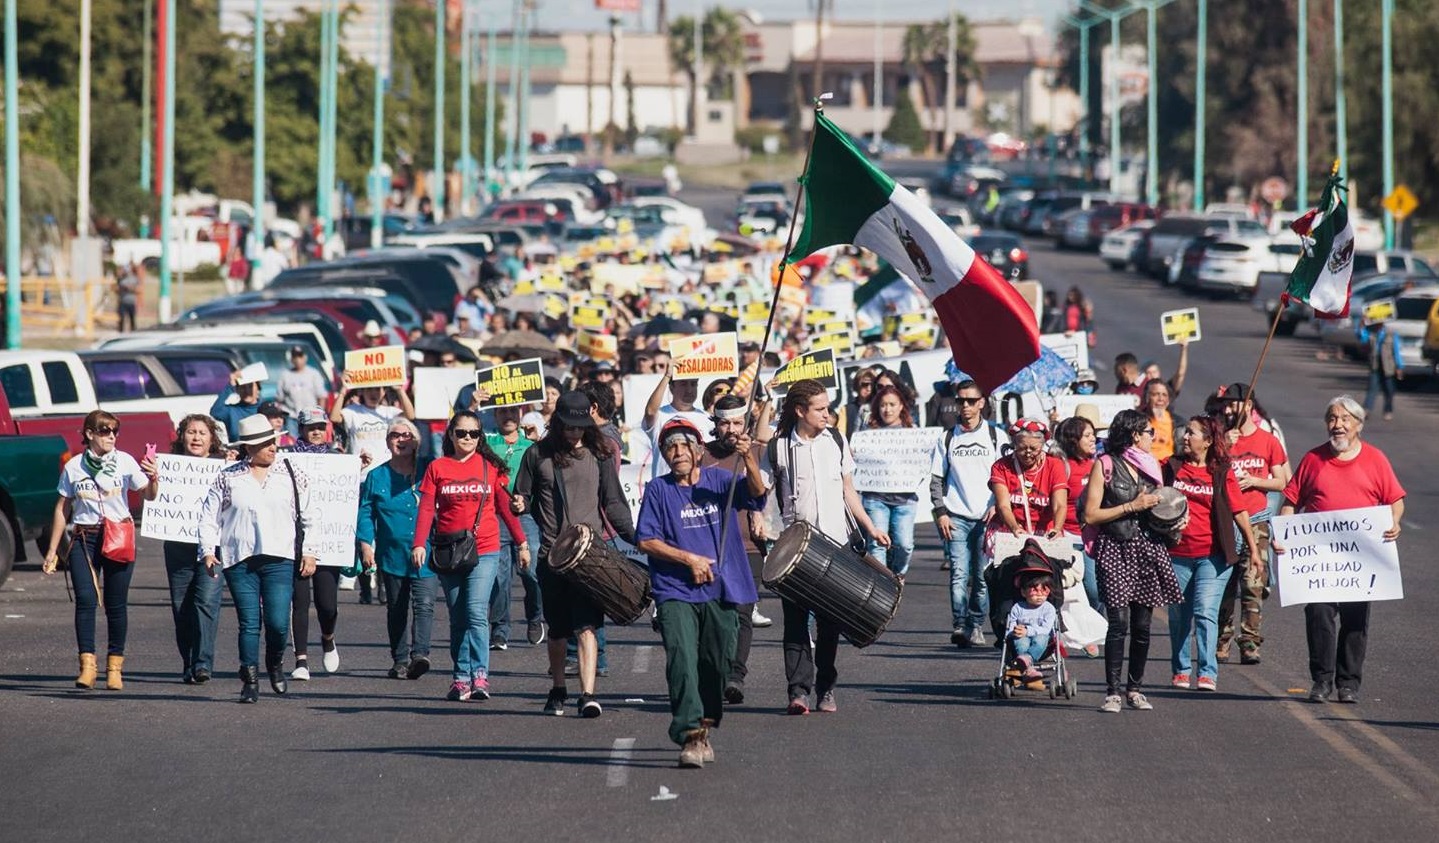 Mexicali Resiste's march against water privatization and the Constellation Brands beer factory in Mexicali in January, 2018.